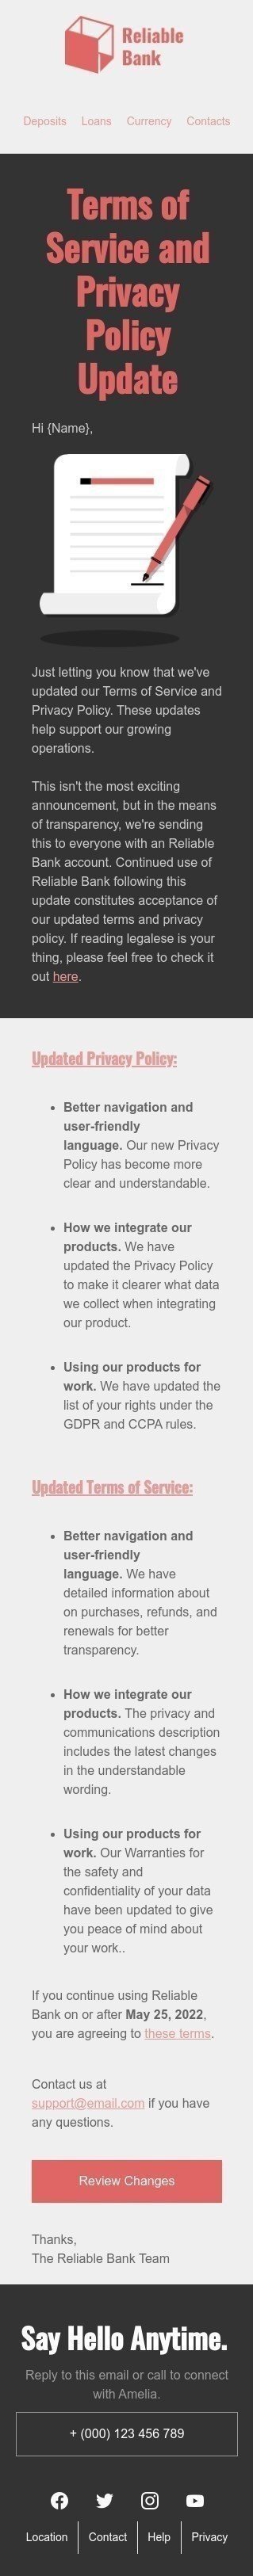 Terms of Service Email Template "Terms of Service and Privacy Policy Update" for Finance industry mobile view